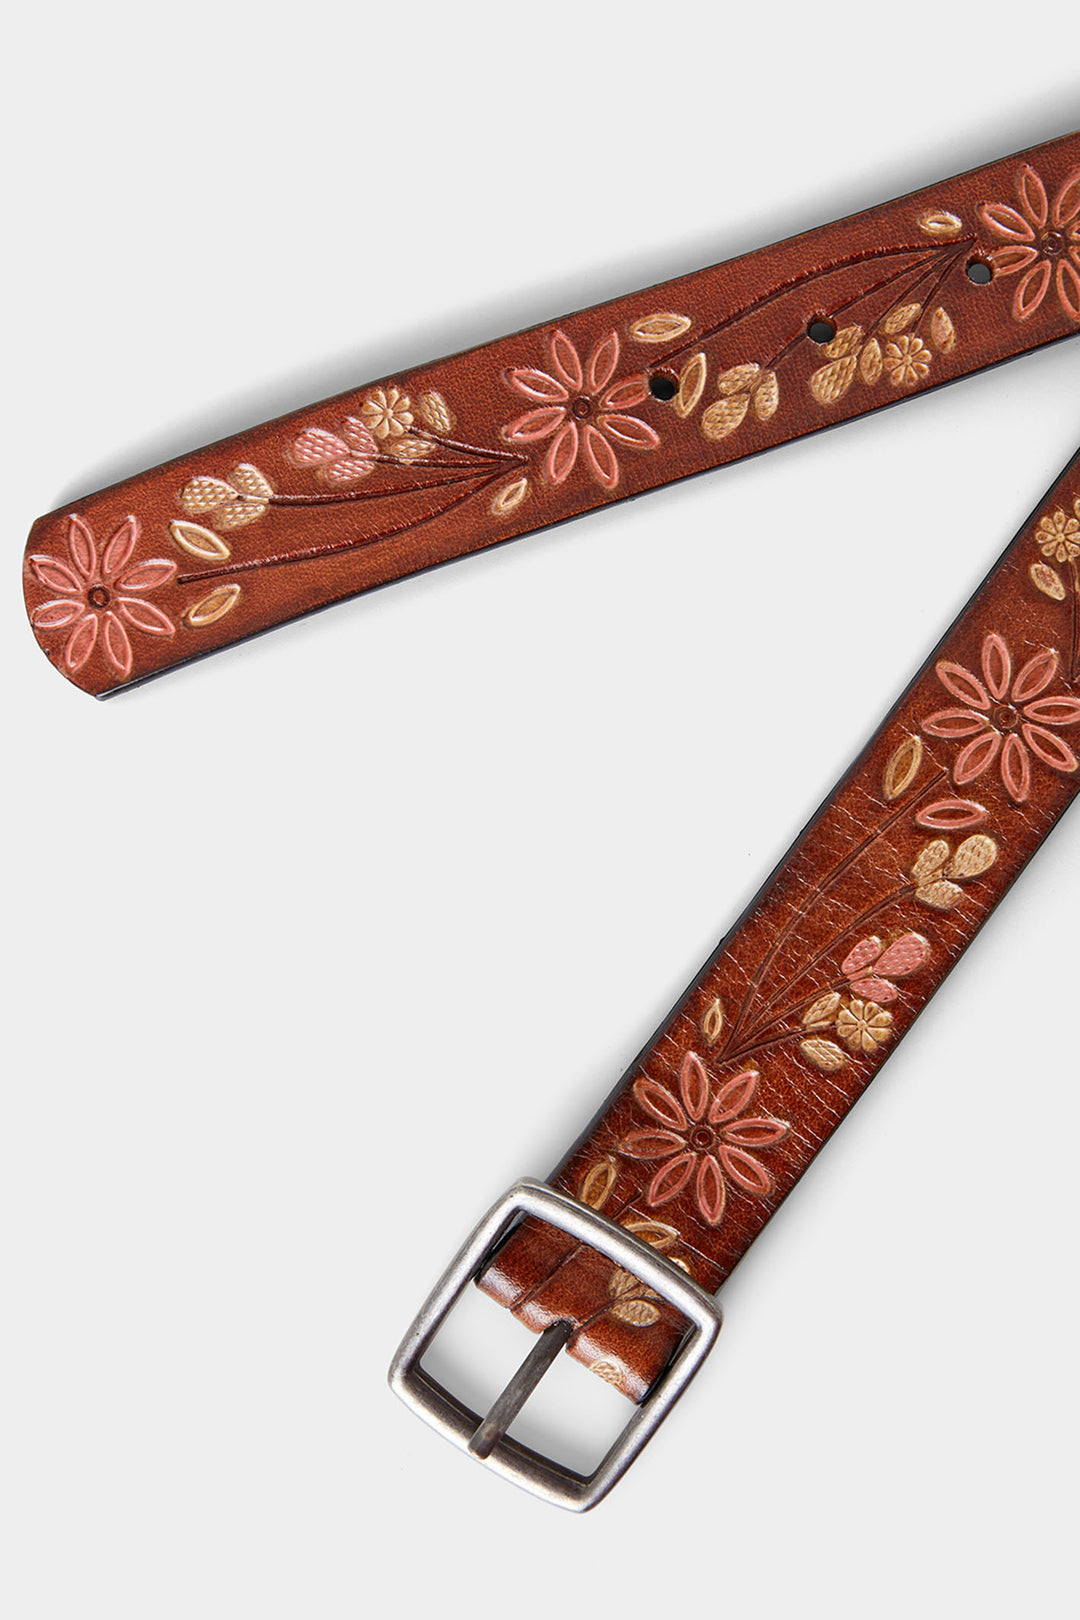 Joe Browns HB407A California Brown Tooled Leather Belt - Experience Boutique